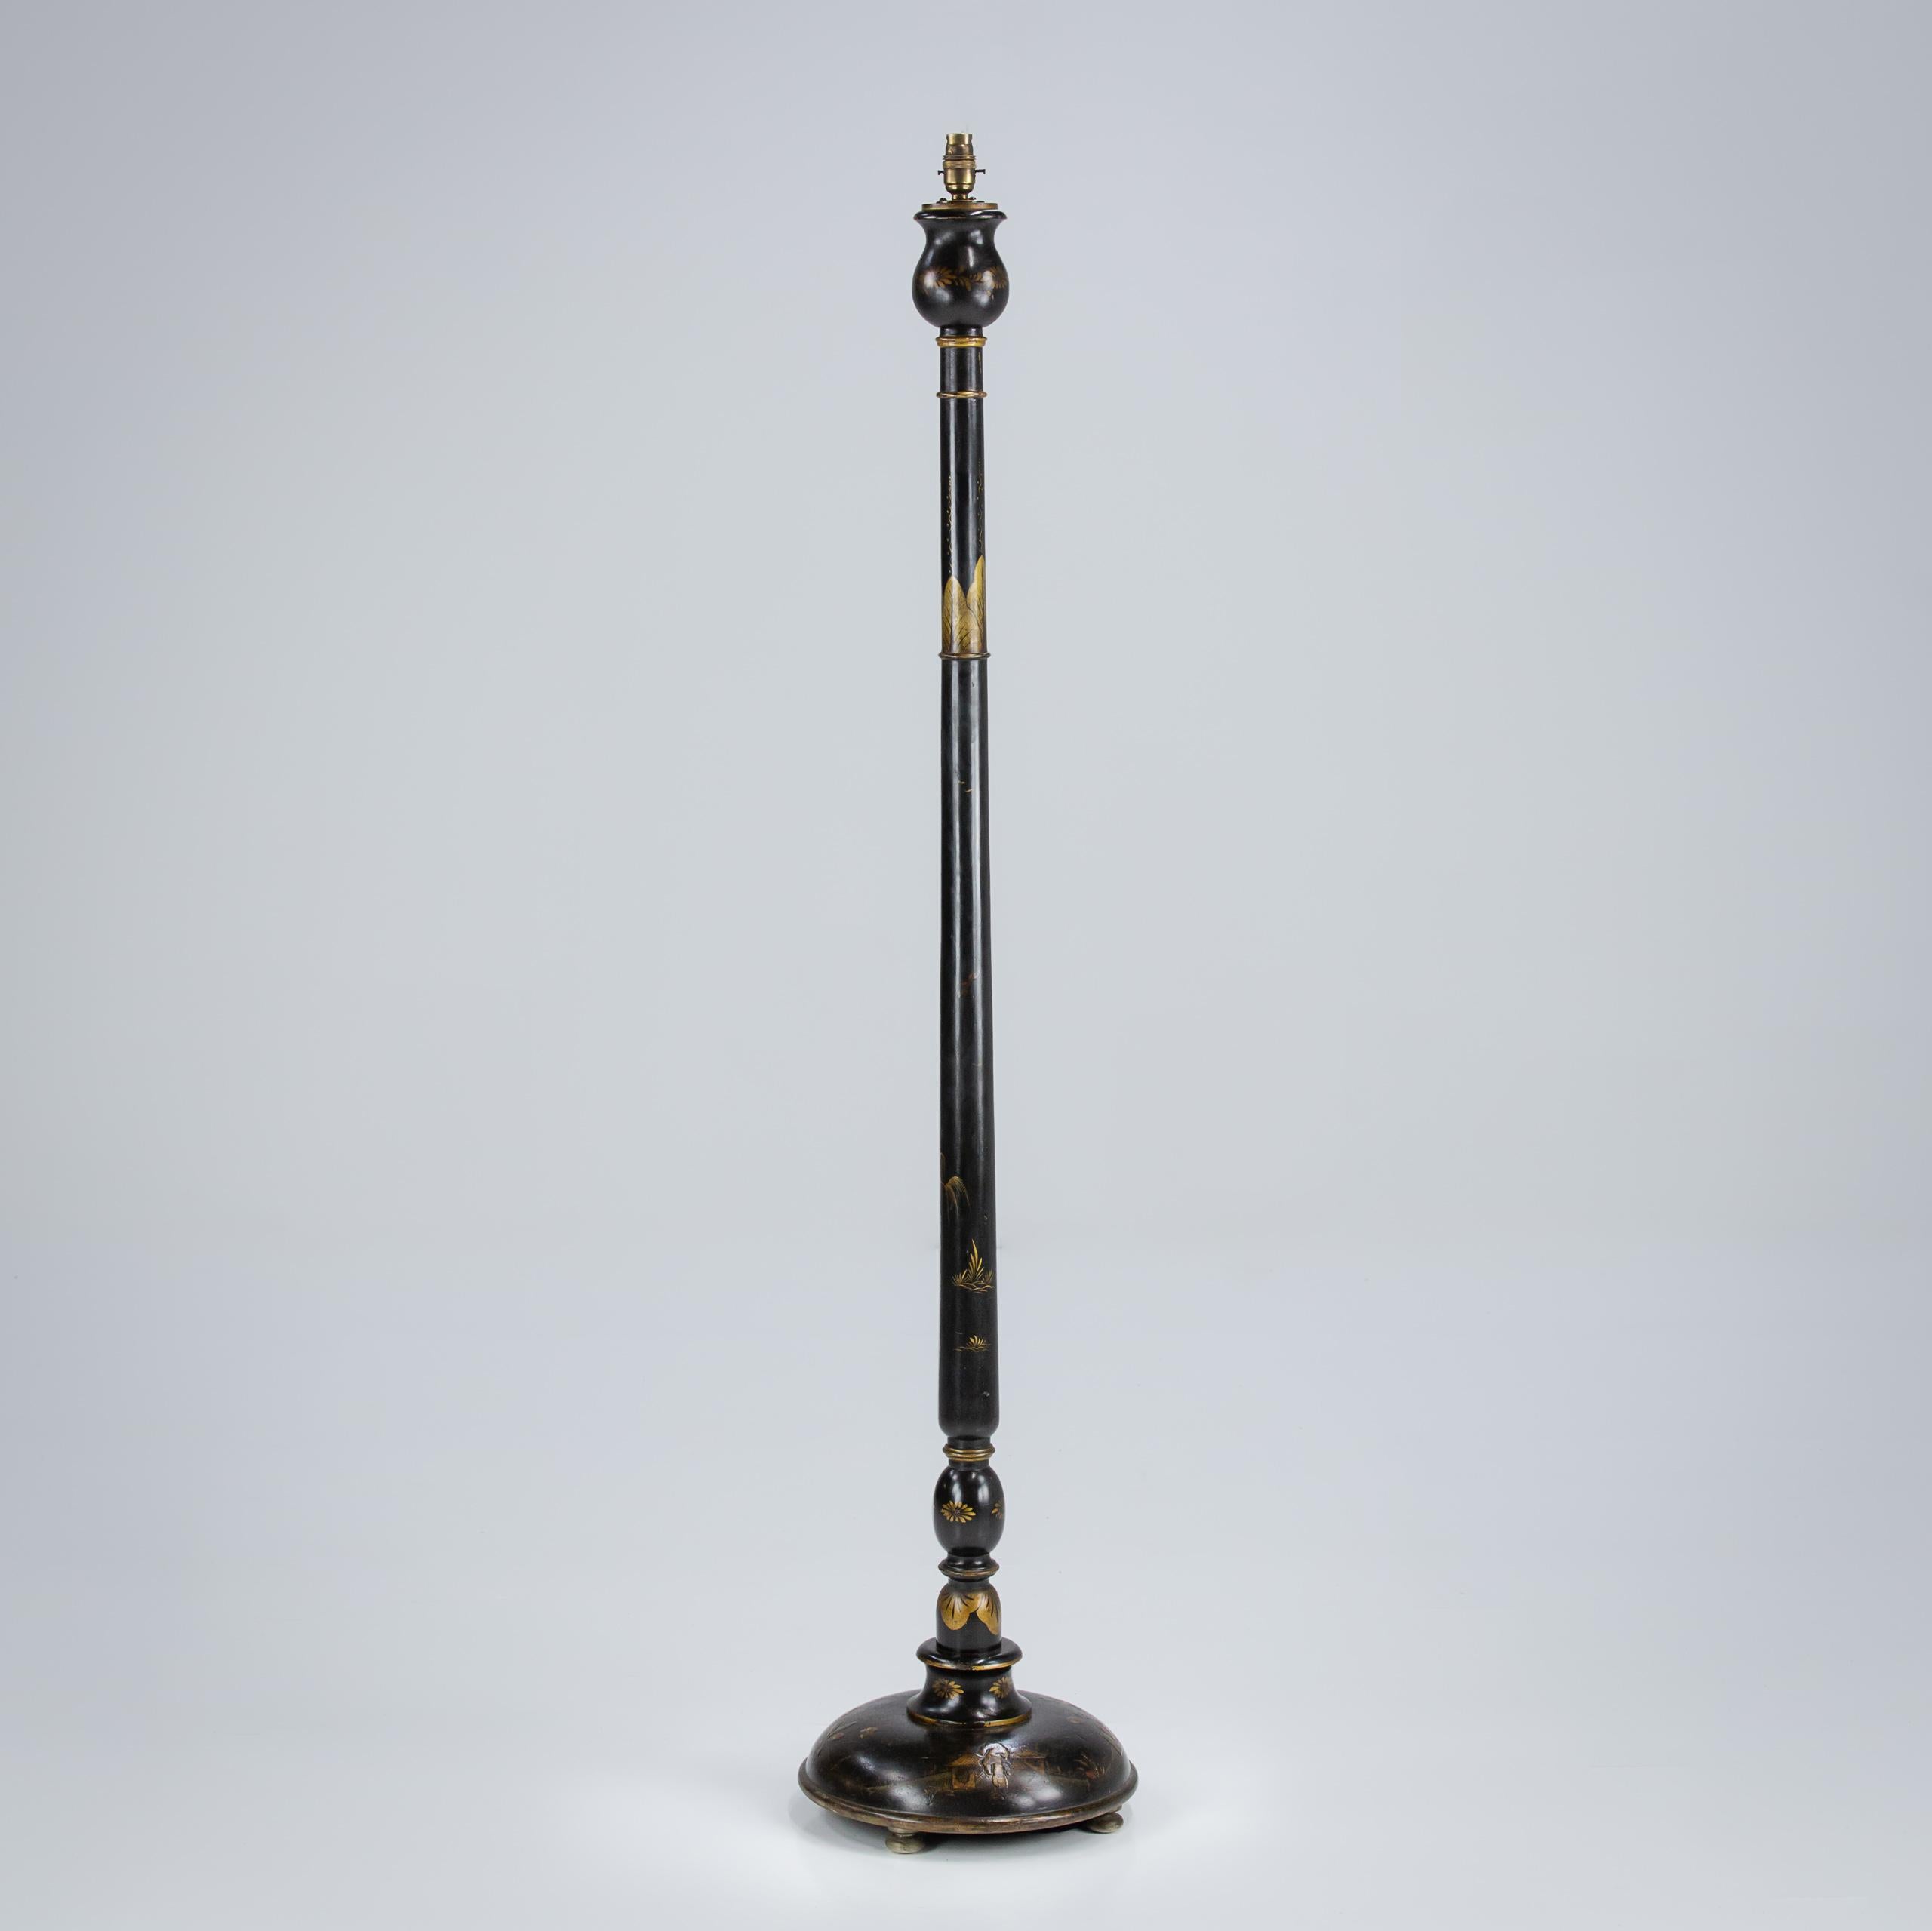 Early 20th Century original ebonised chinoiserie floor standing lamp. Circular turned base on small bun feet with intricate turned and decorated stem. Rewired in antique style flex and PAT tested. England, Circa 1900.